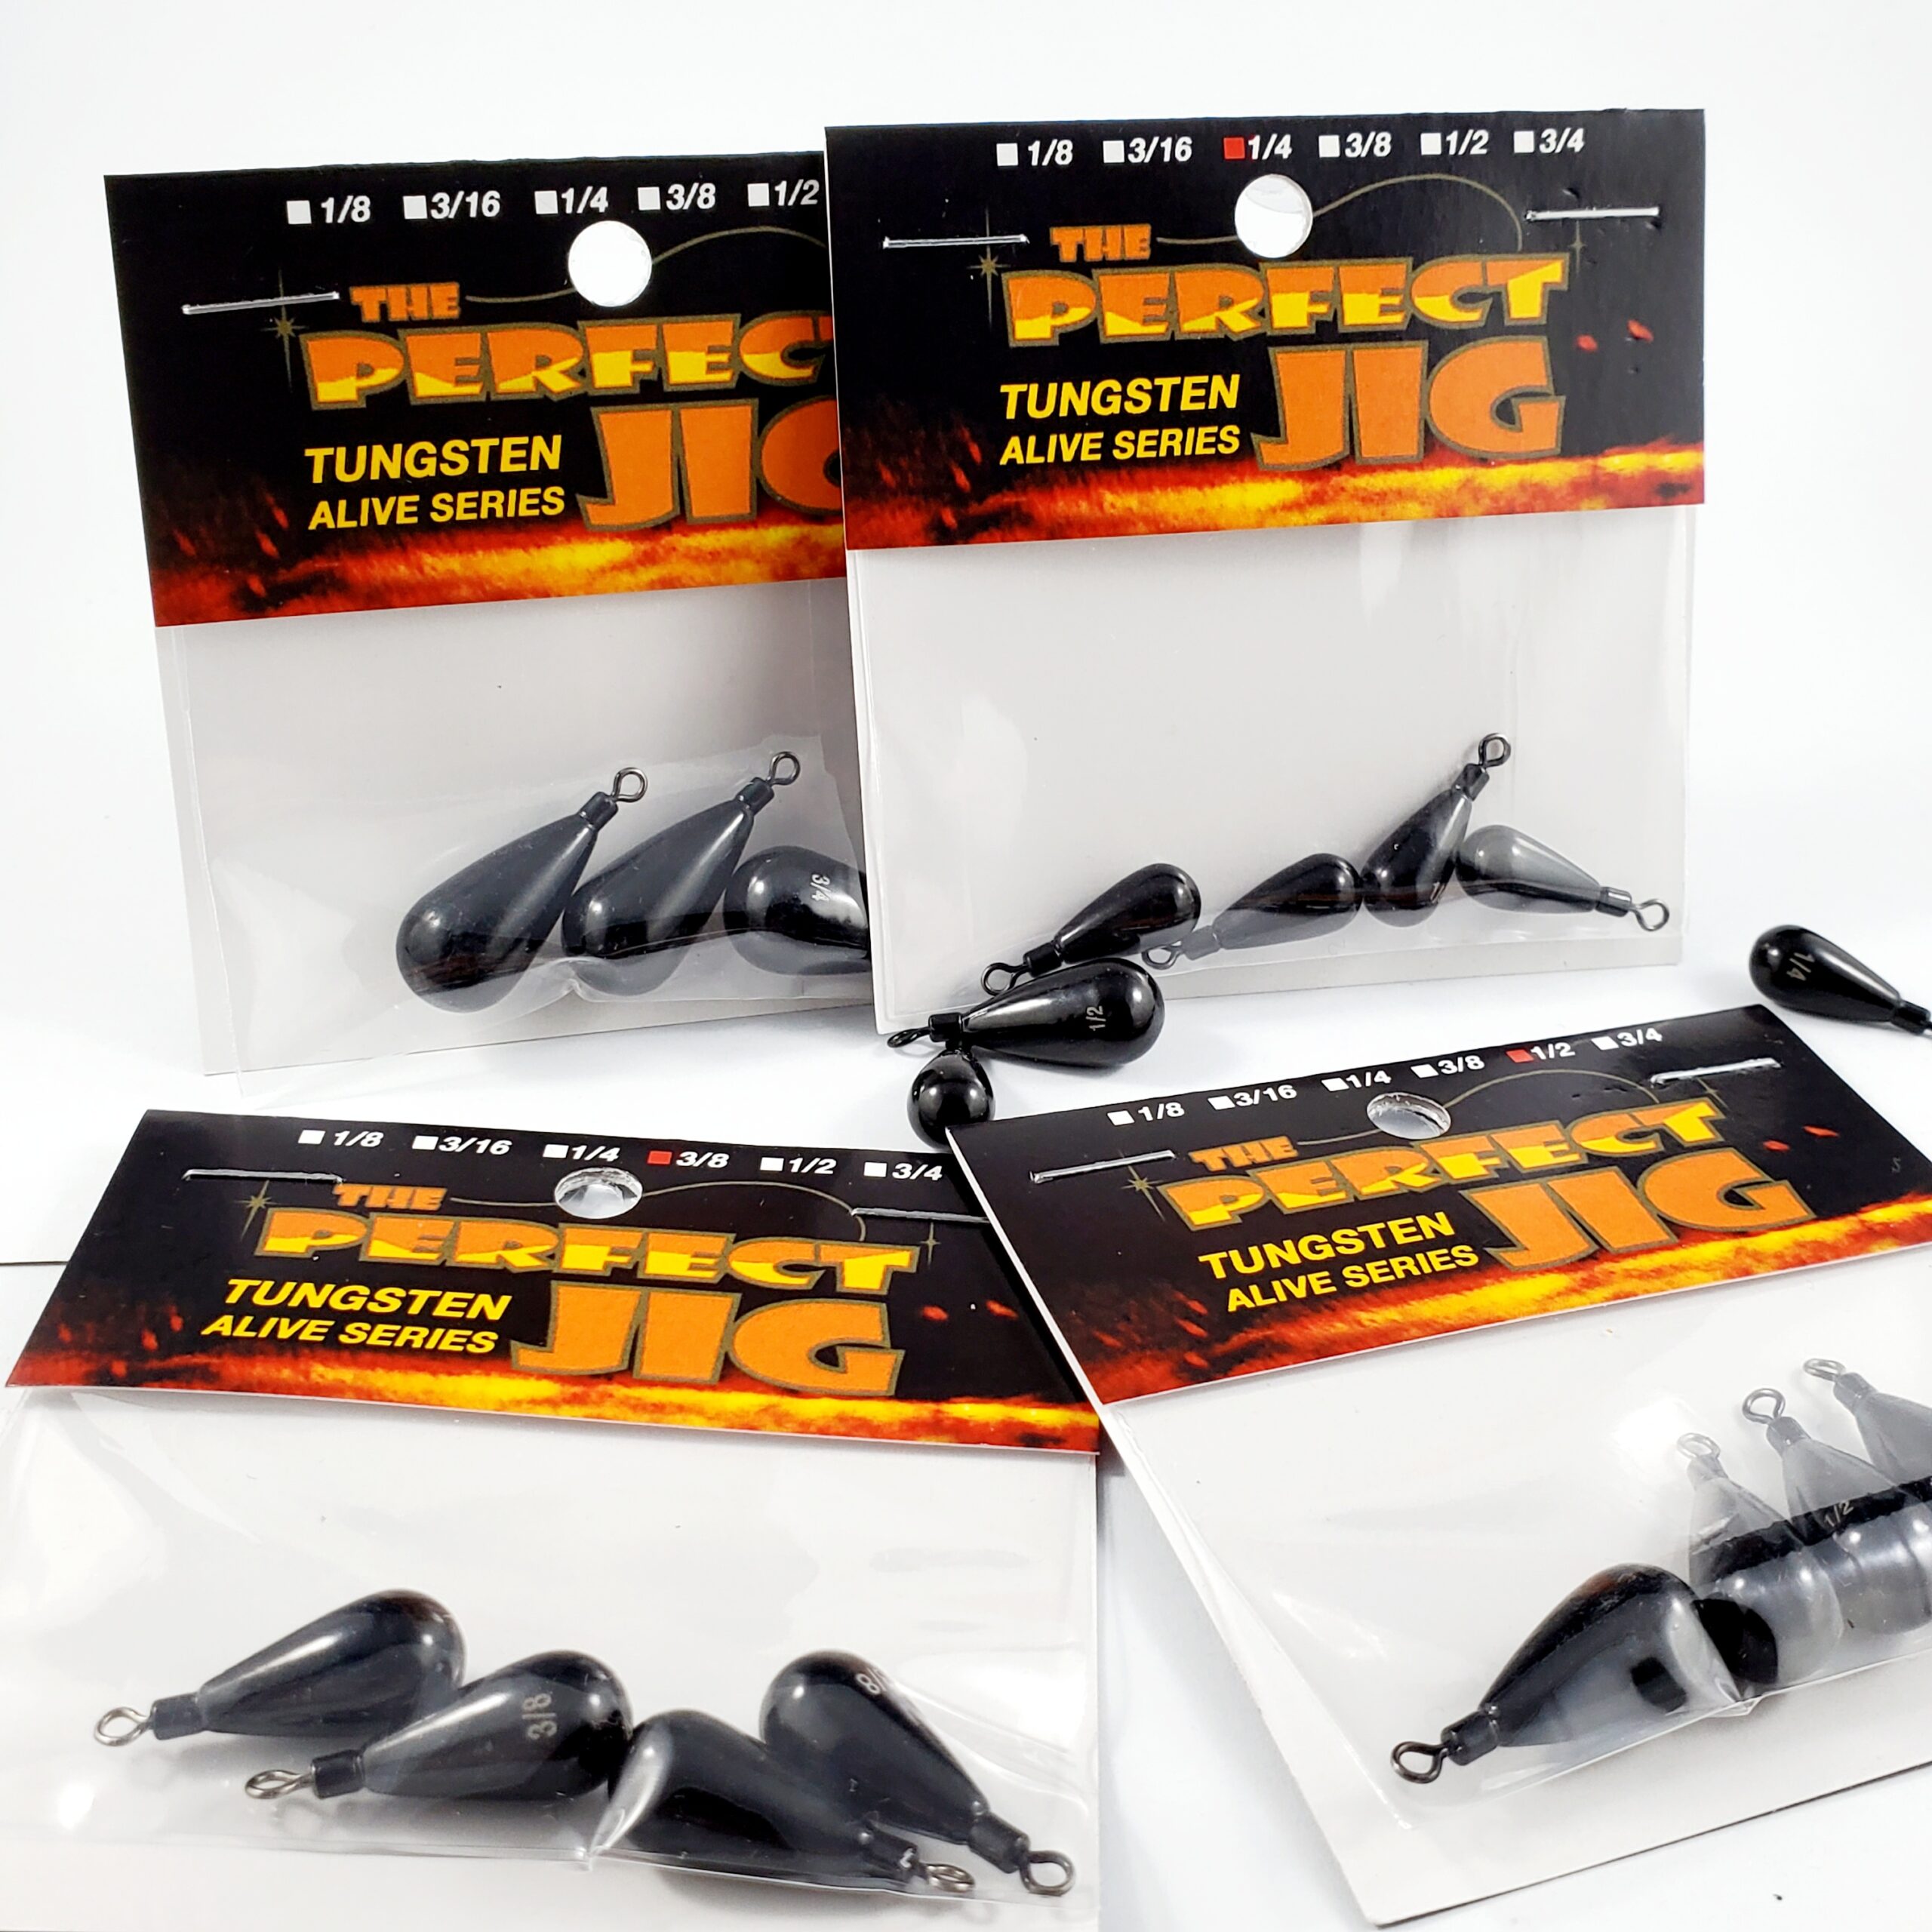 Tungsten Alive series Dropshot Weights - The Perfect Jig